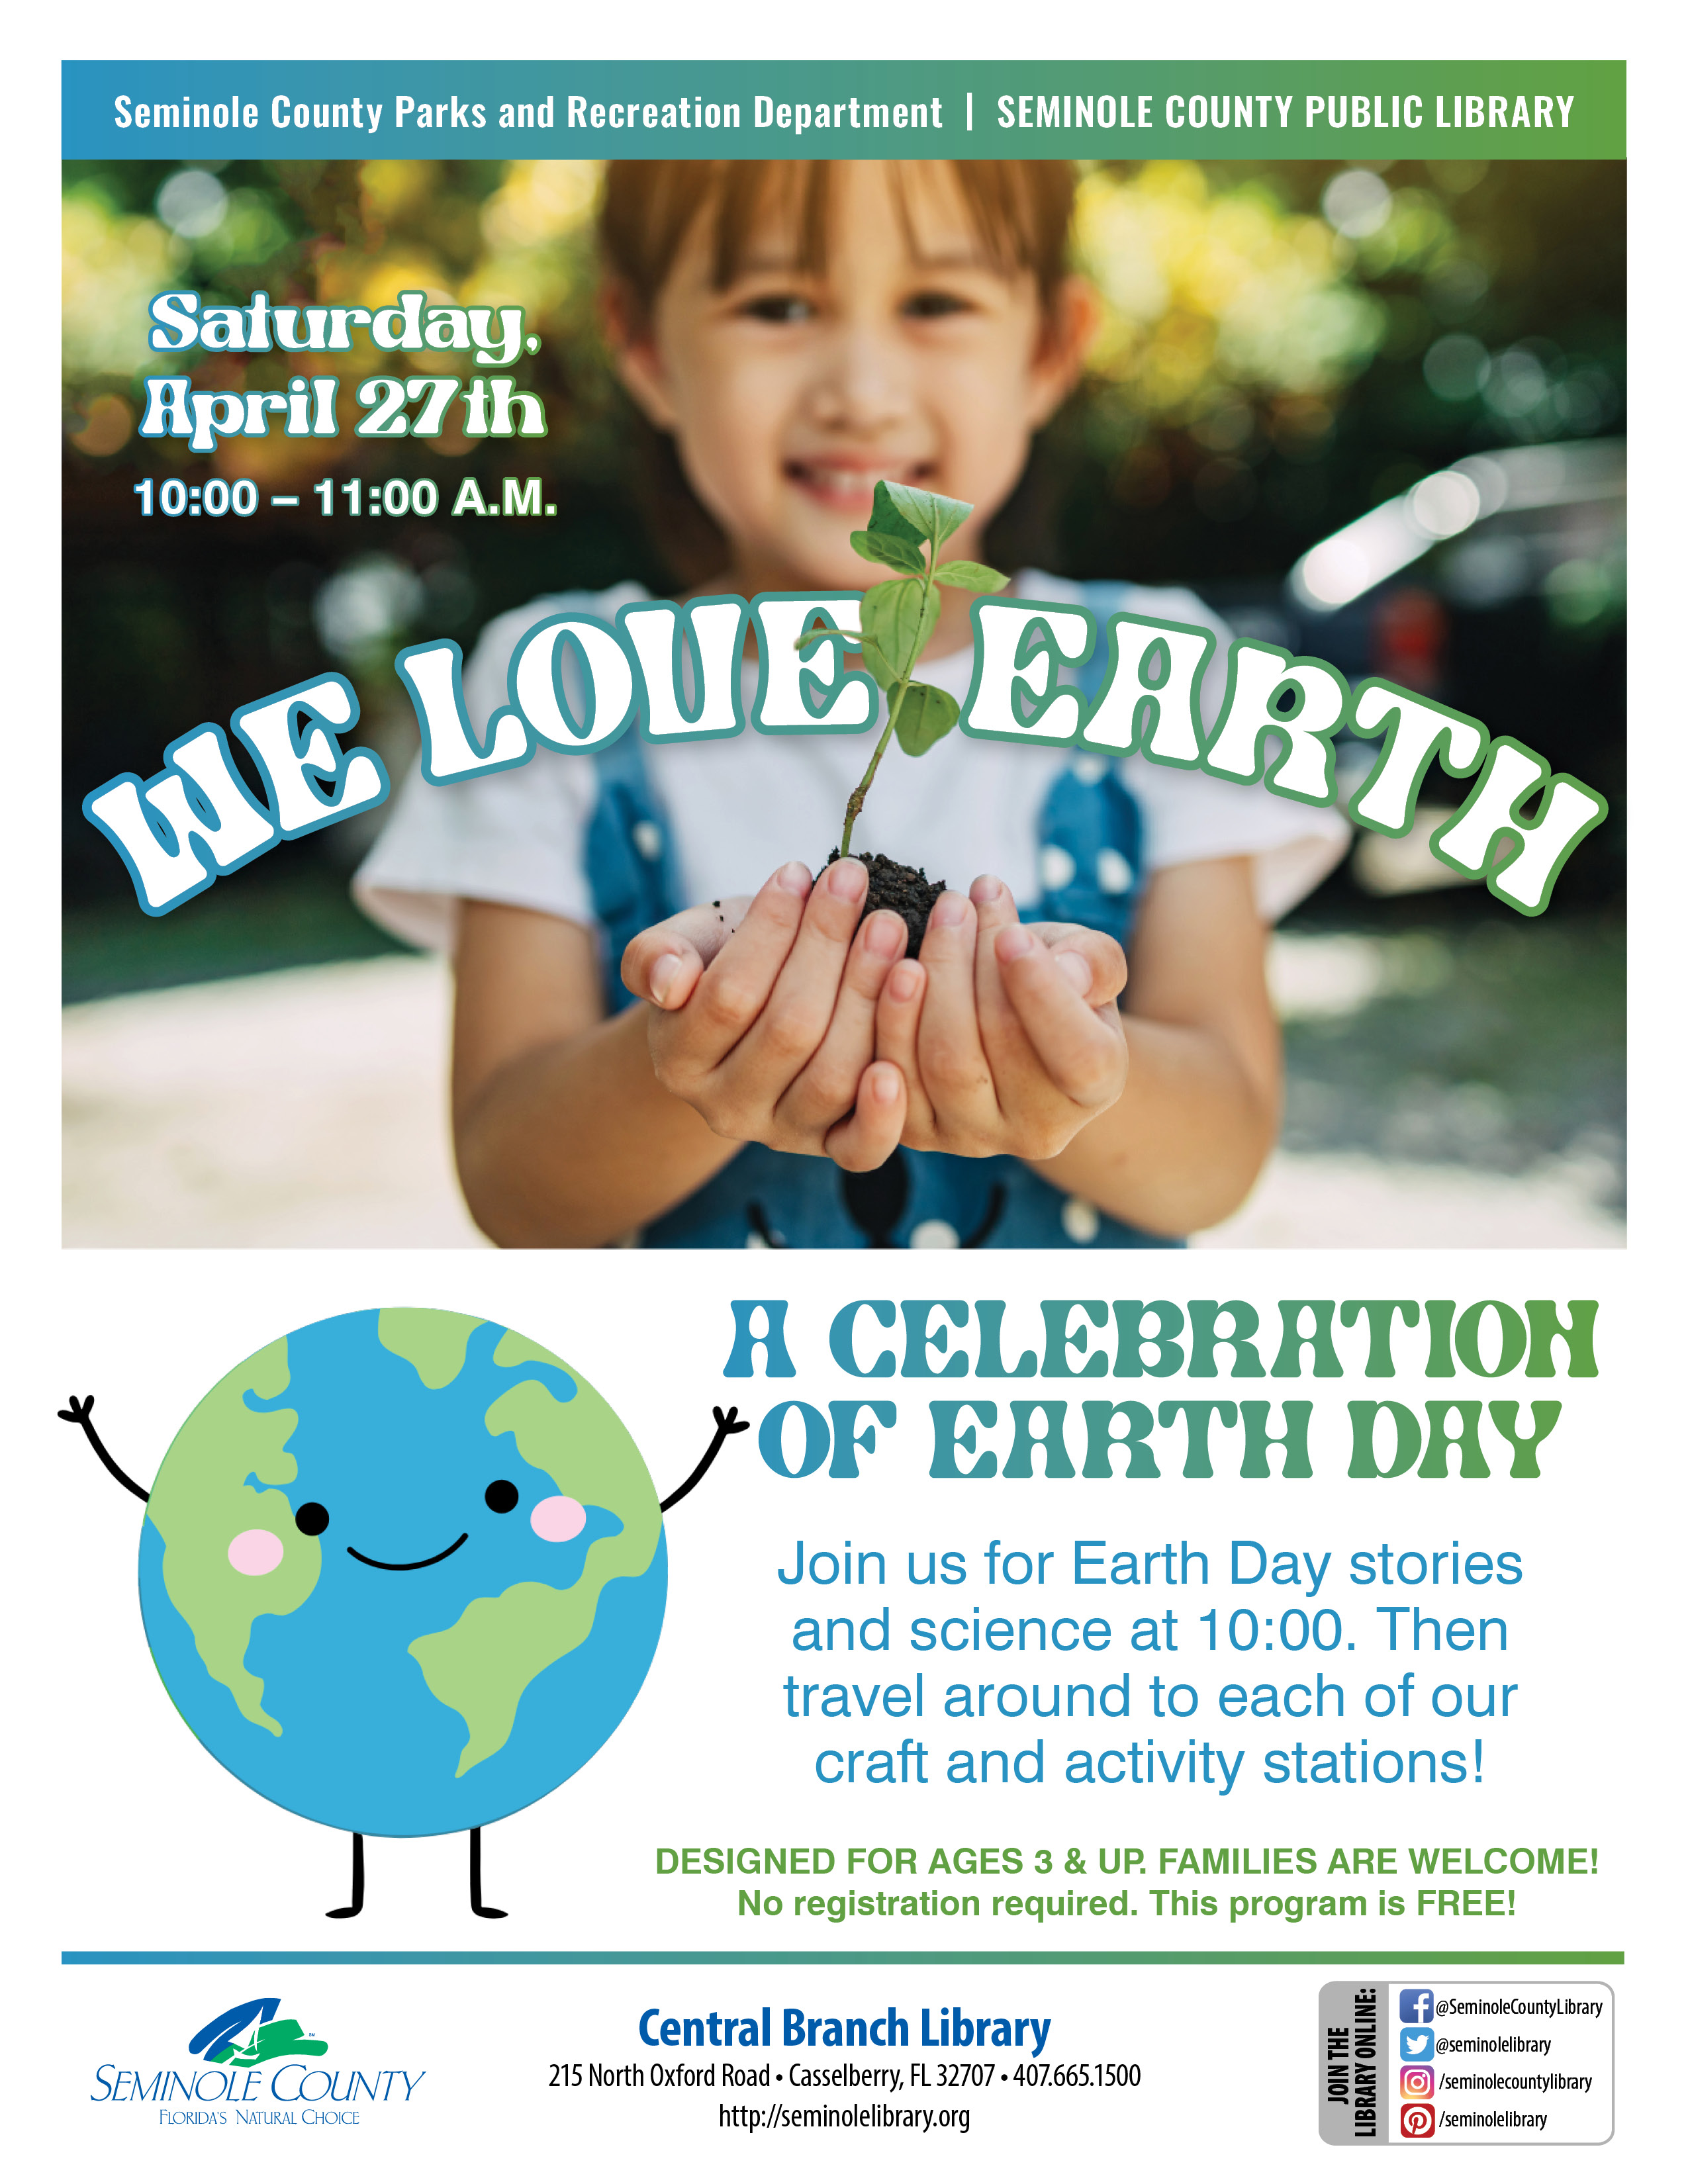 We Love Earth - A Celebration of Earth Day